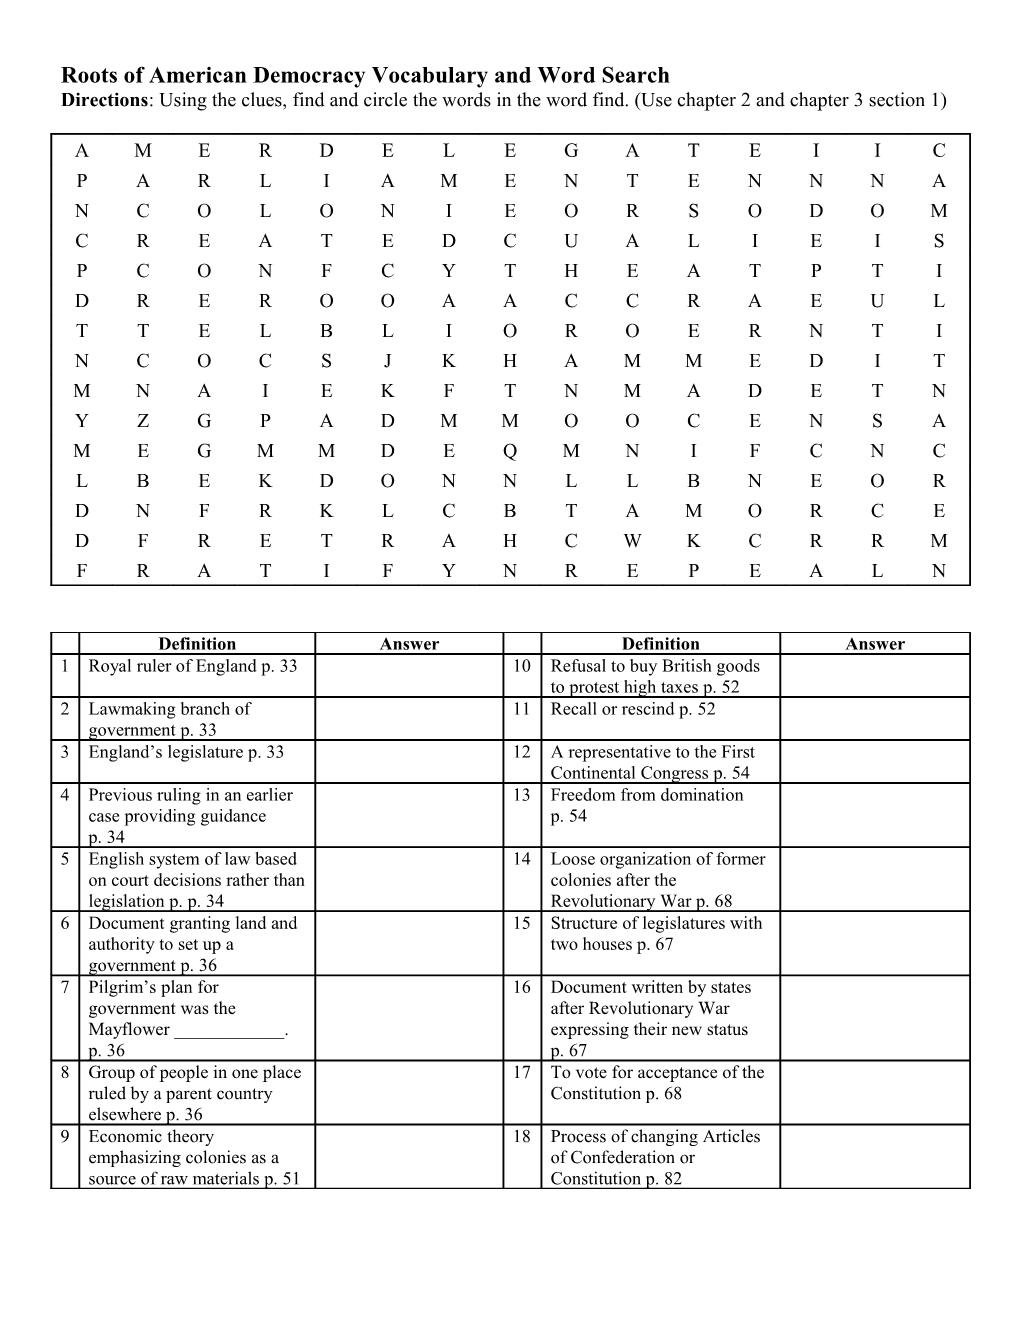 Roots of American Democracy Vocabulary and Word Search